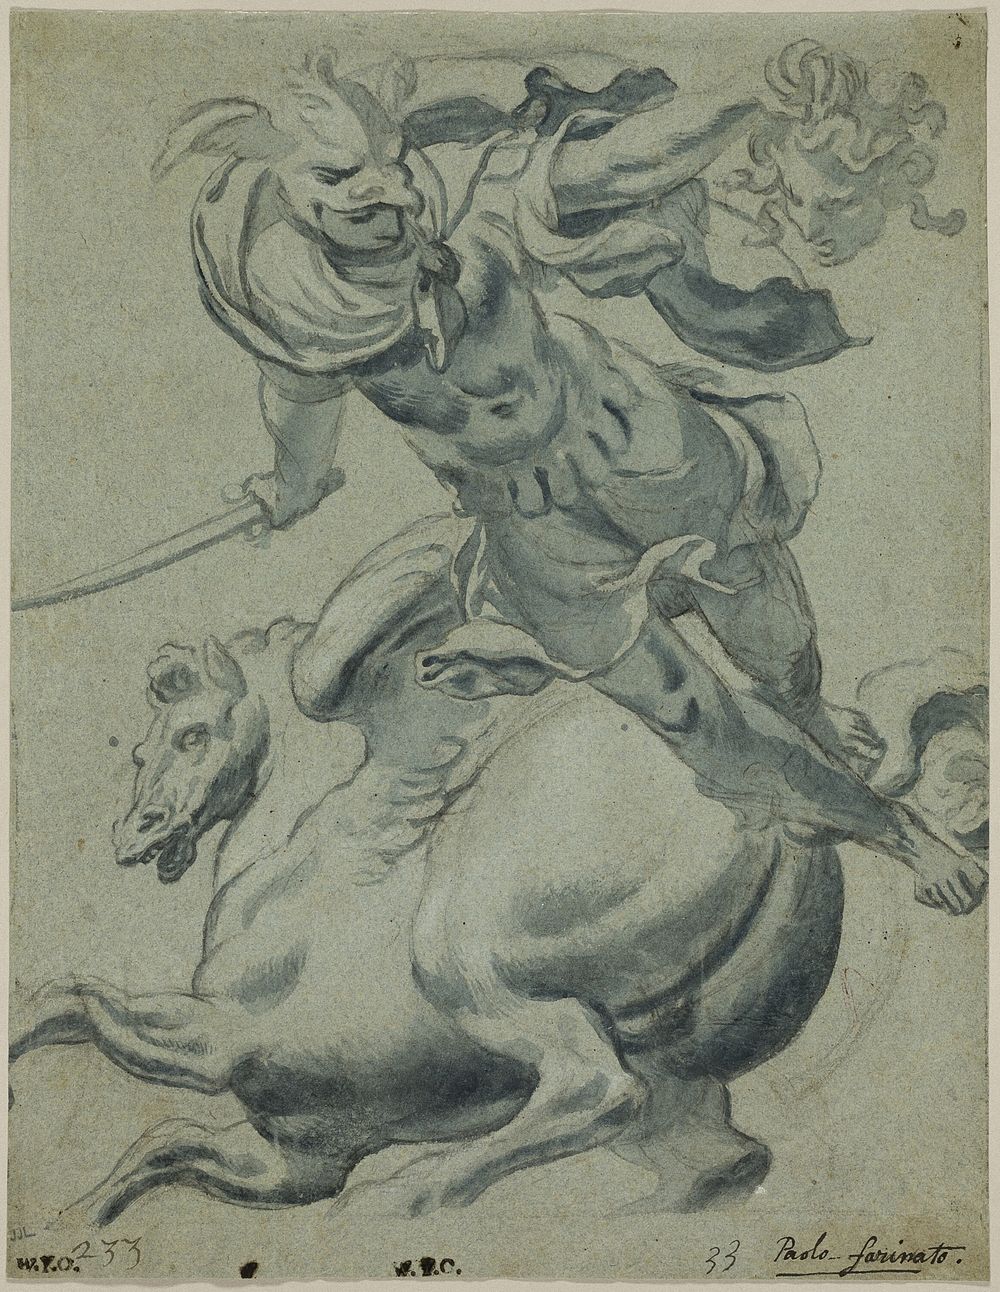 Perseus Holding the Head of Medusa, with Pegasus in the Background by Paolo Farinato